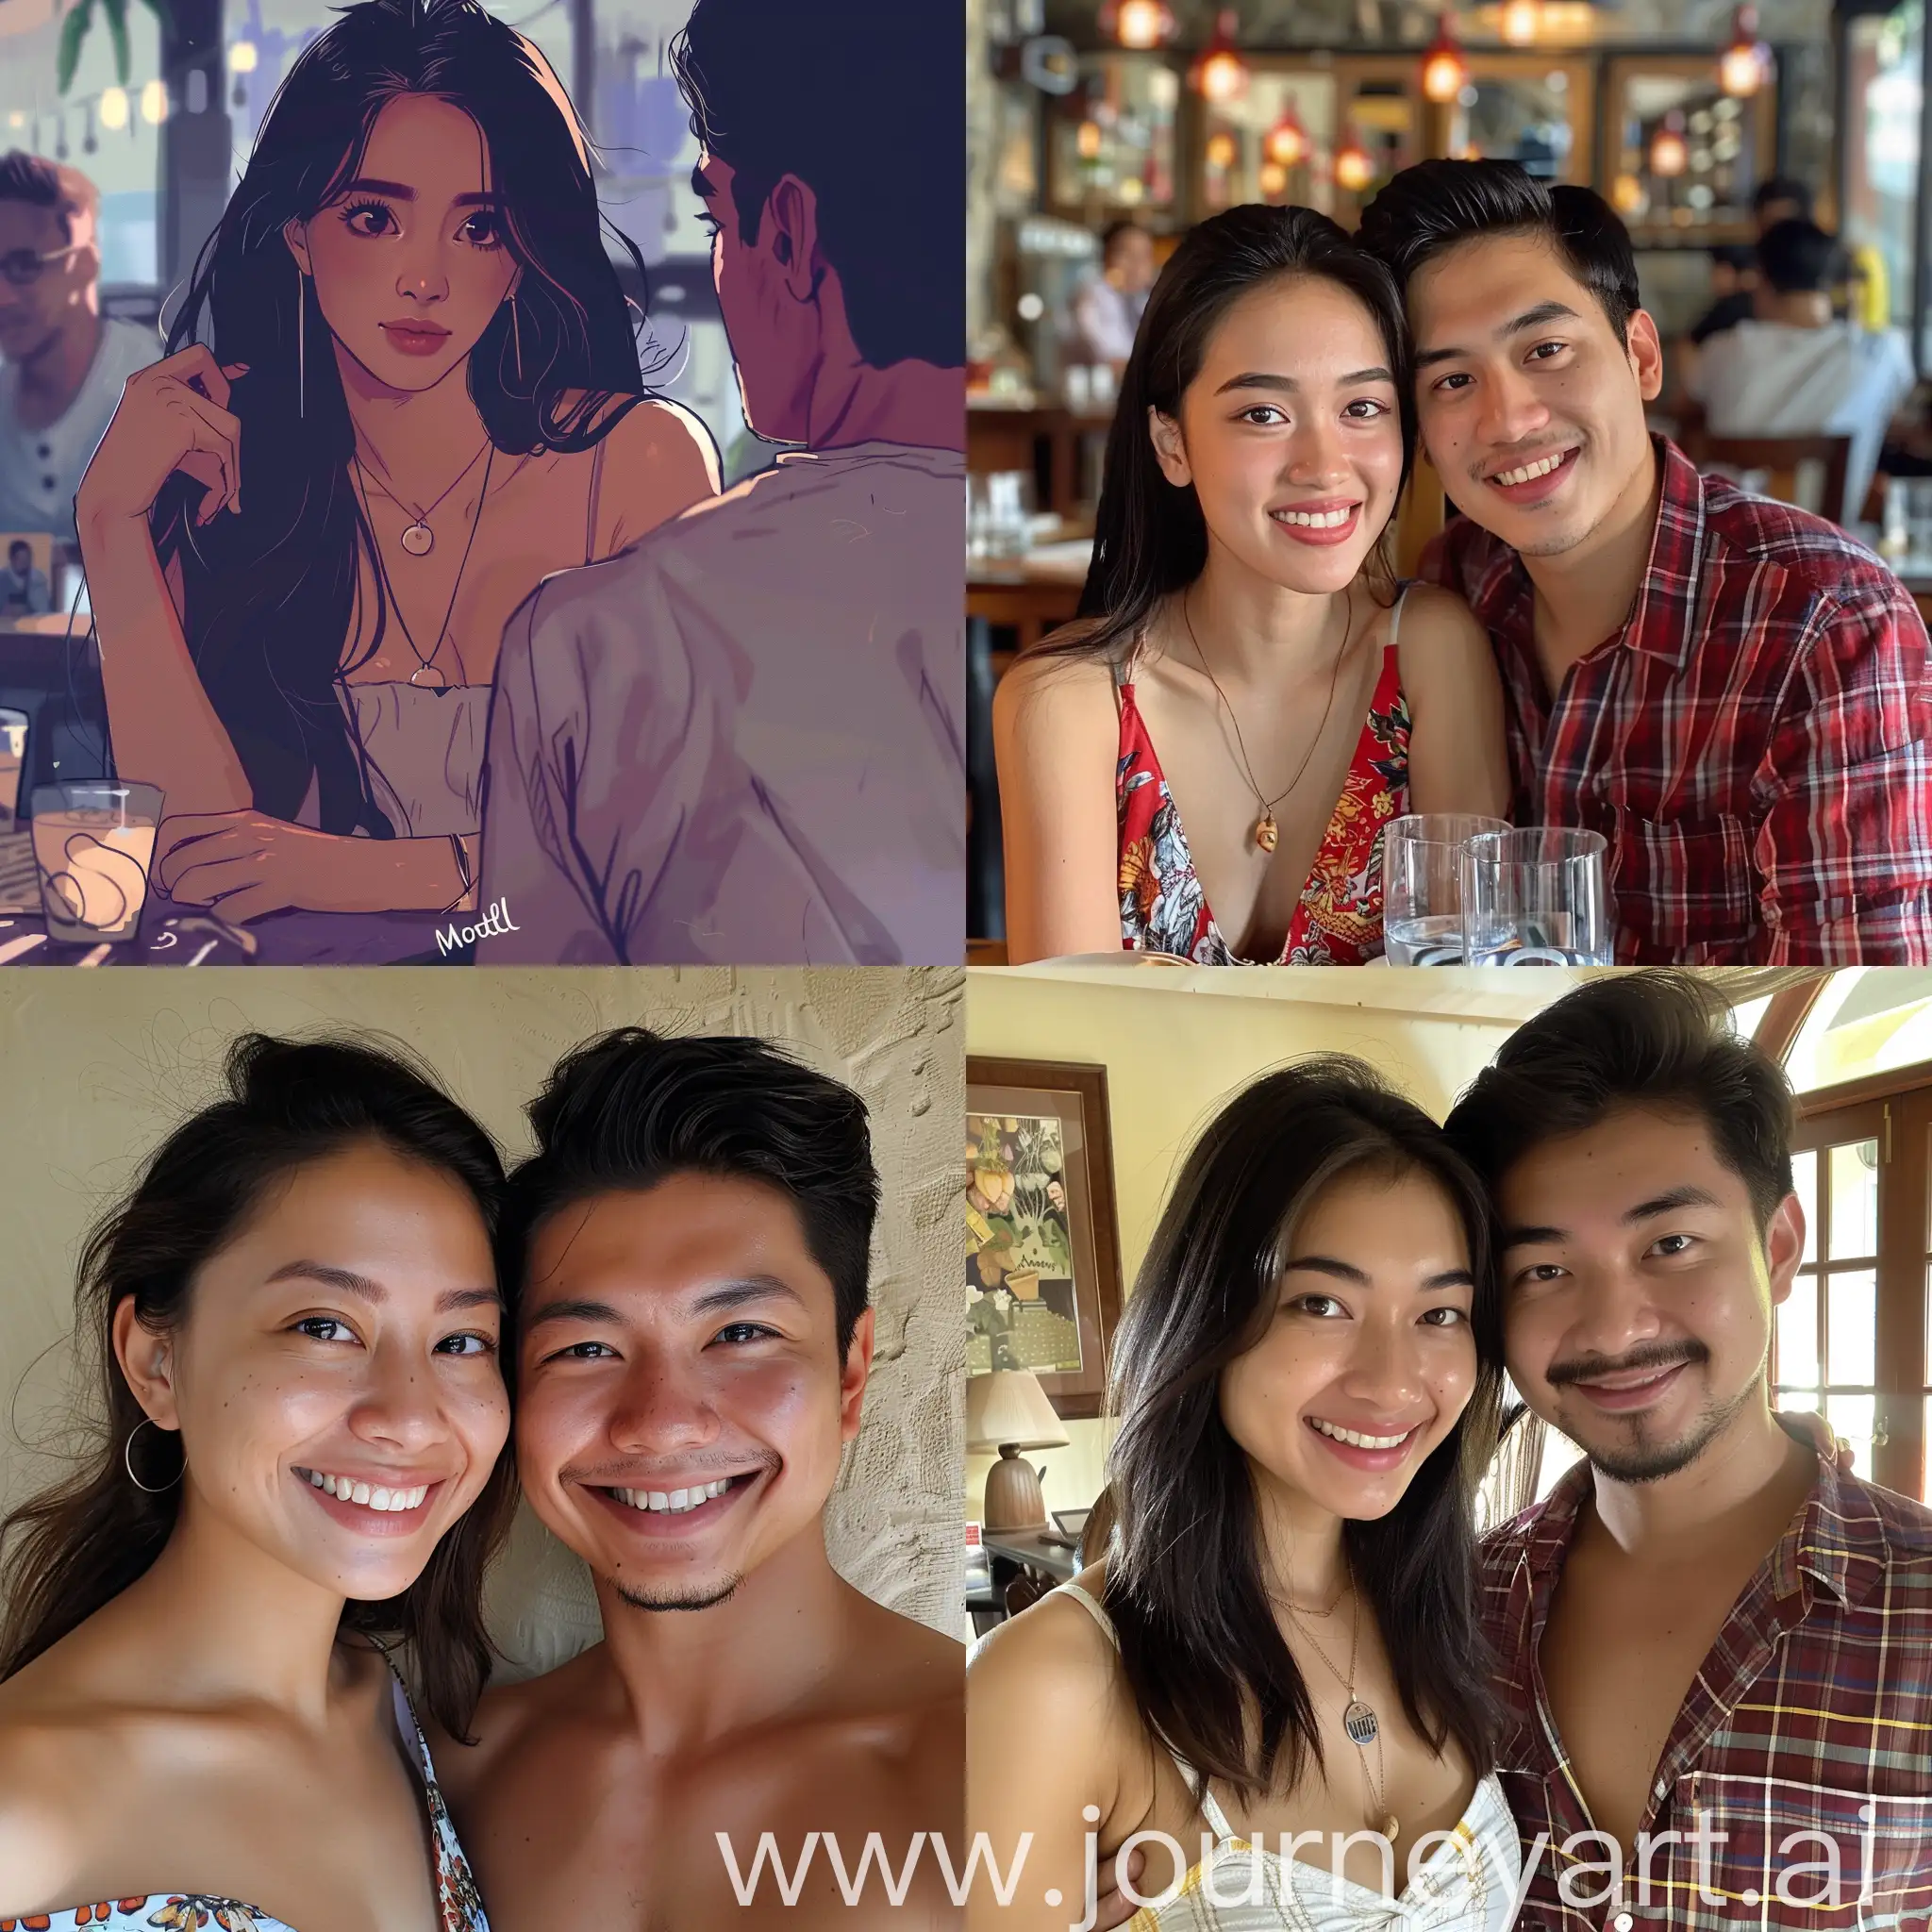 Filipino-Woman-Finds-Acceptance-Embracing-Diversity-and-Love